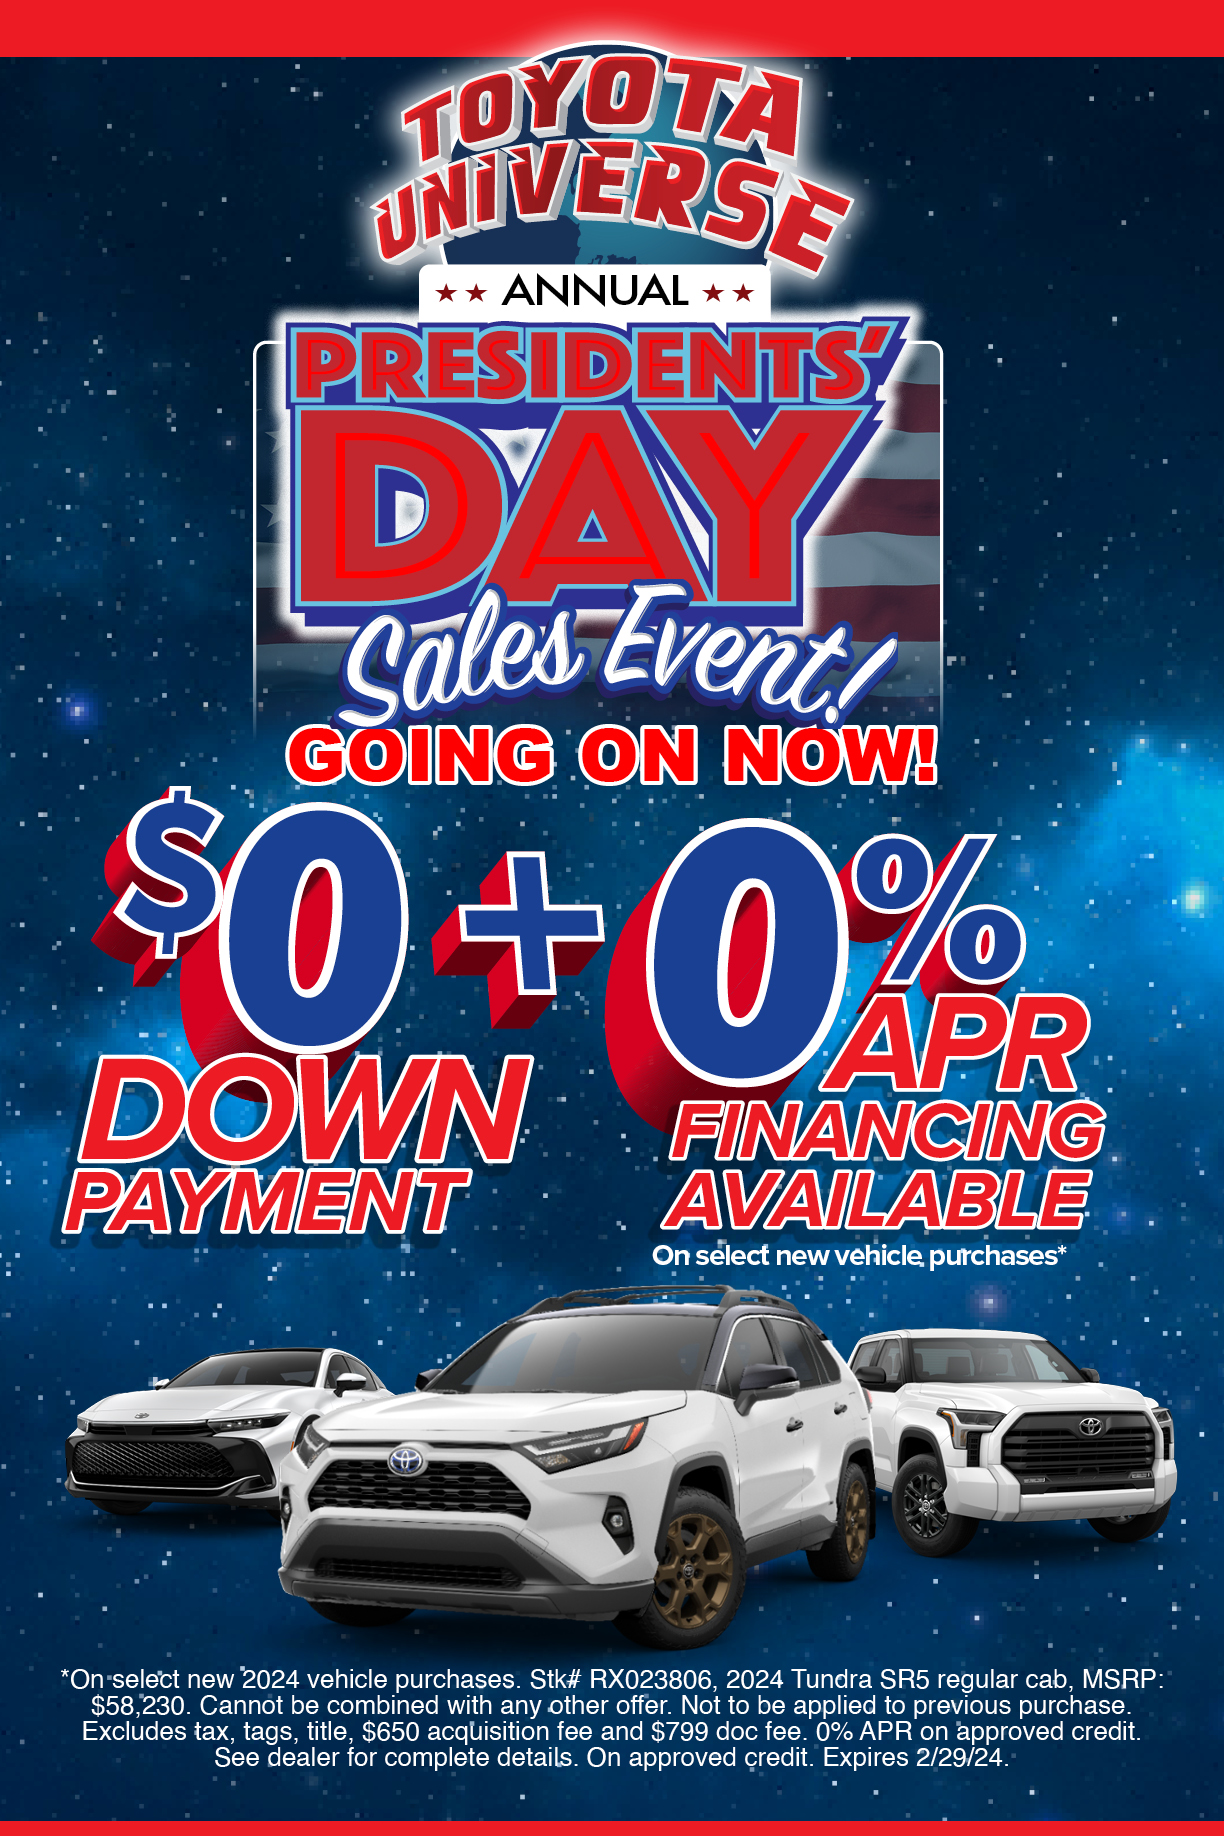 Presidents Day Sales Event Toyota Universe